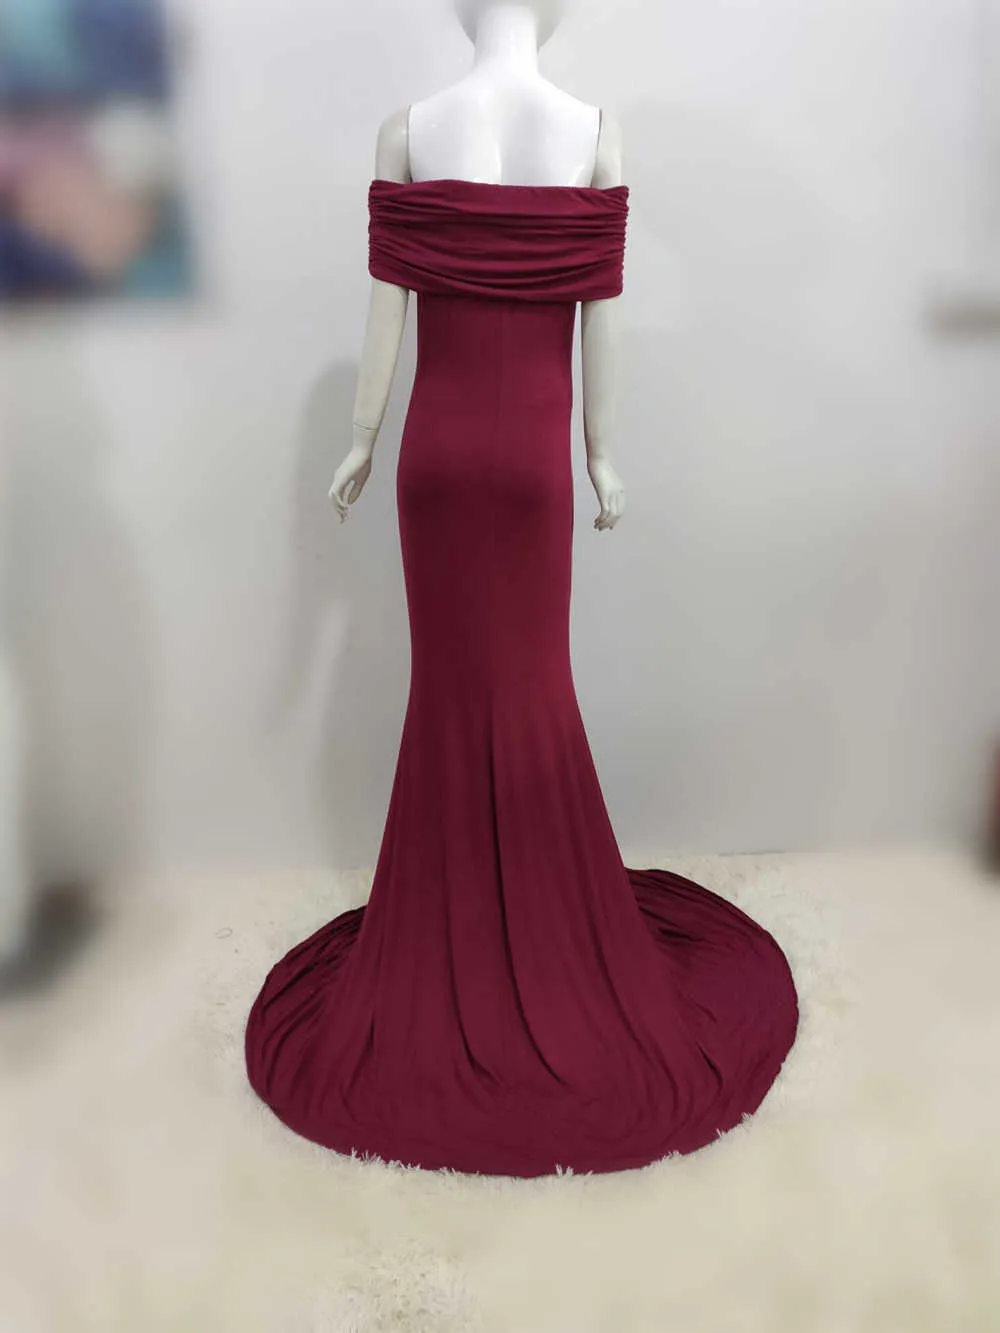 Shoulderless Maternity Dresses Photography Props Long Pregnancy Dress For Baby Shower Photo Shoots Pregnant Women Maxi Gown 2020 (3)